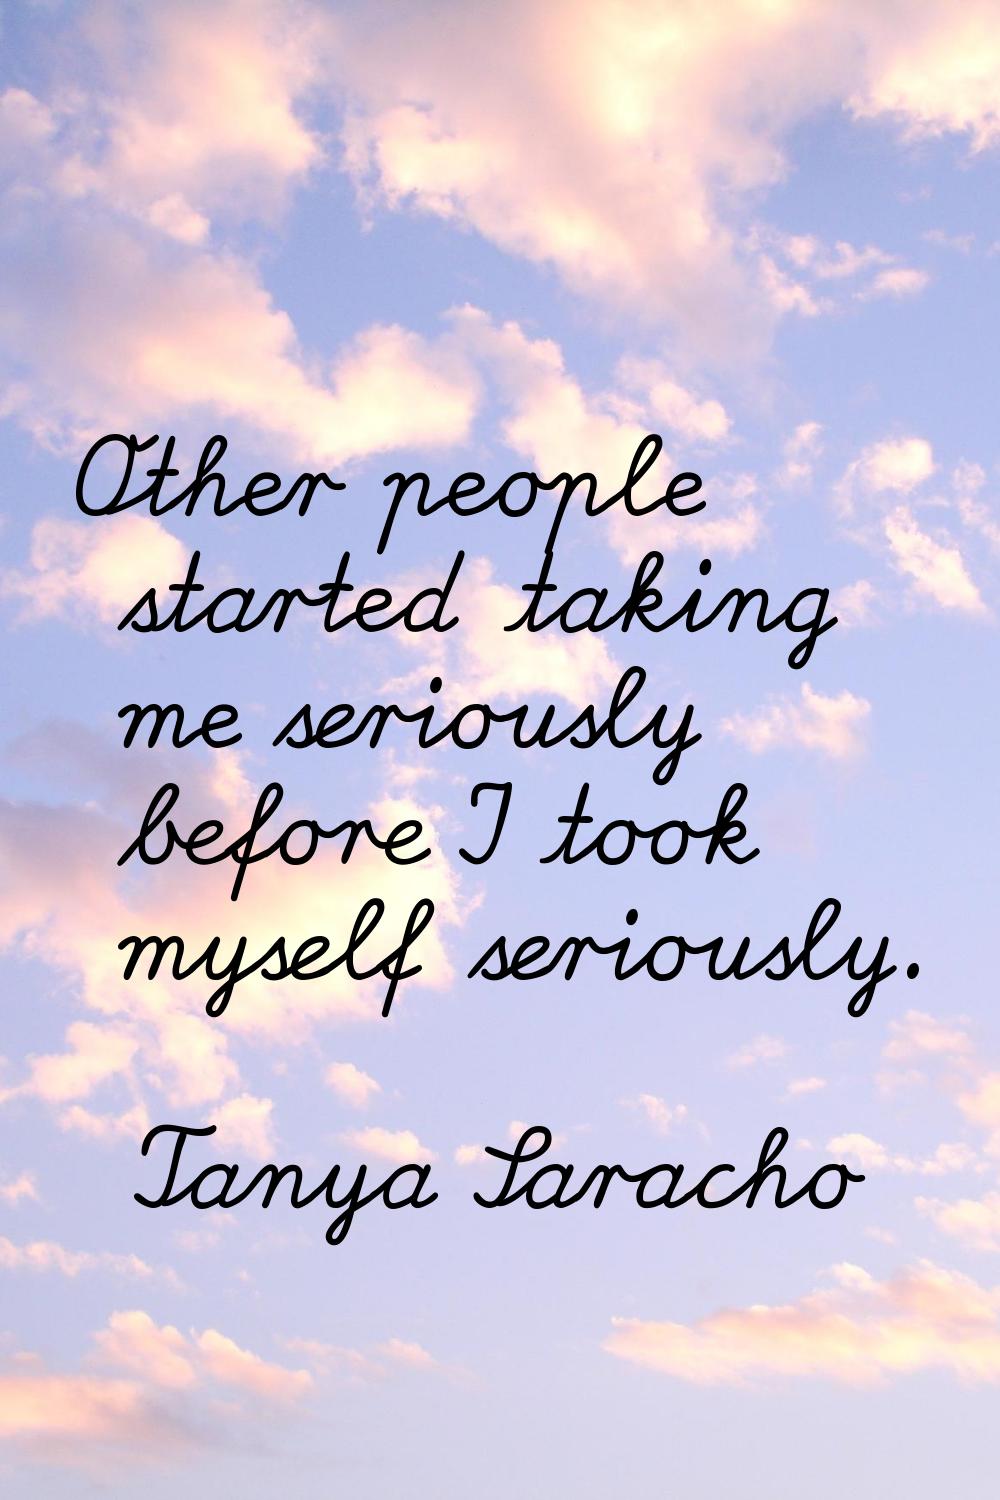 Other people started taking me seriously before I took myself seriously.